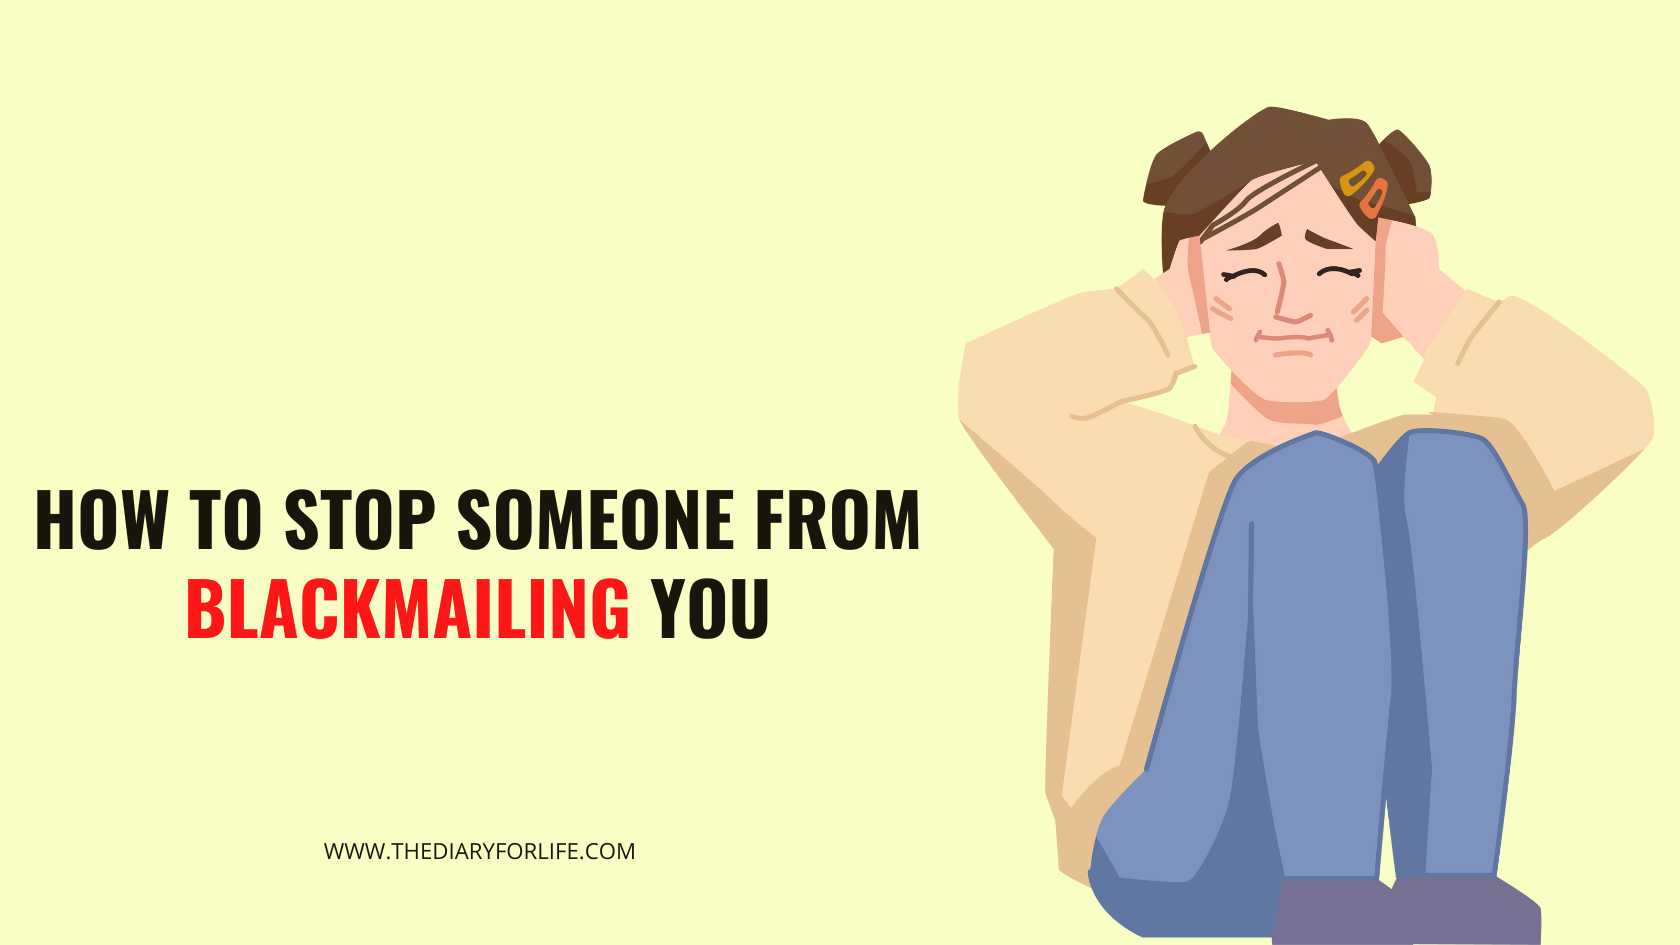 How To Stop Someone From Blackmailing You